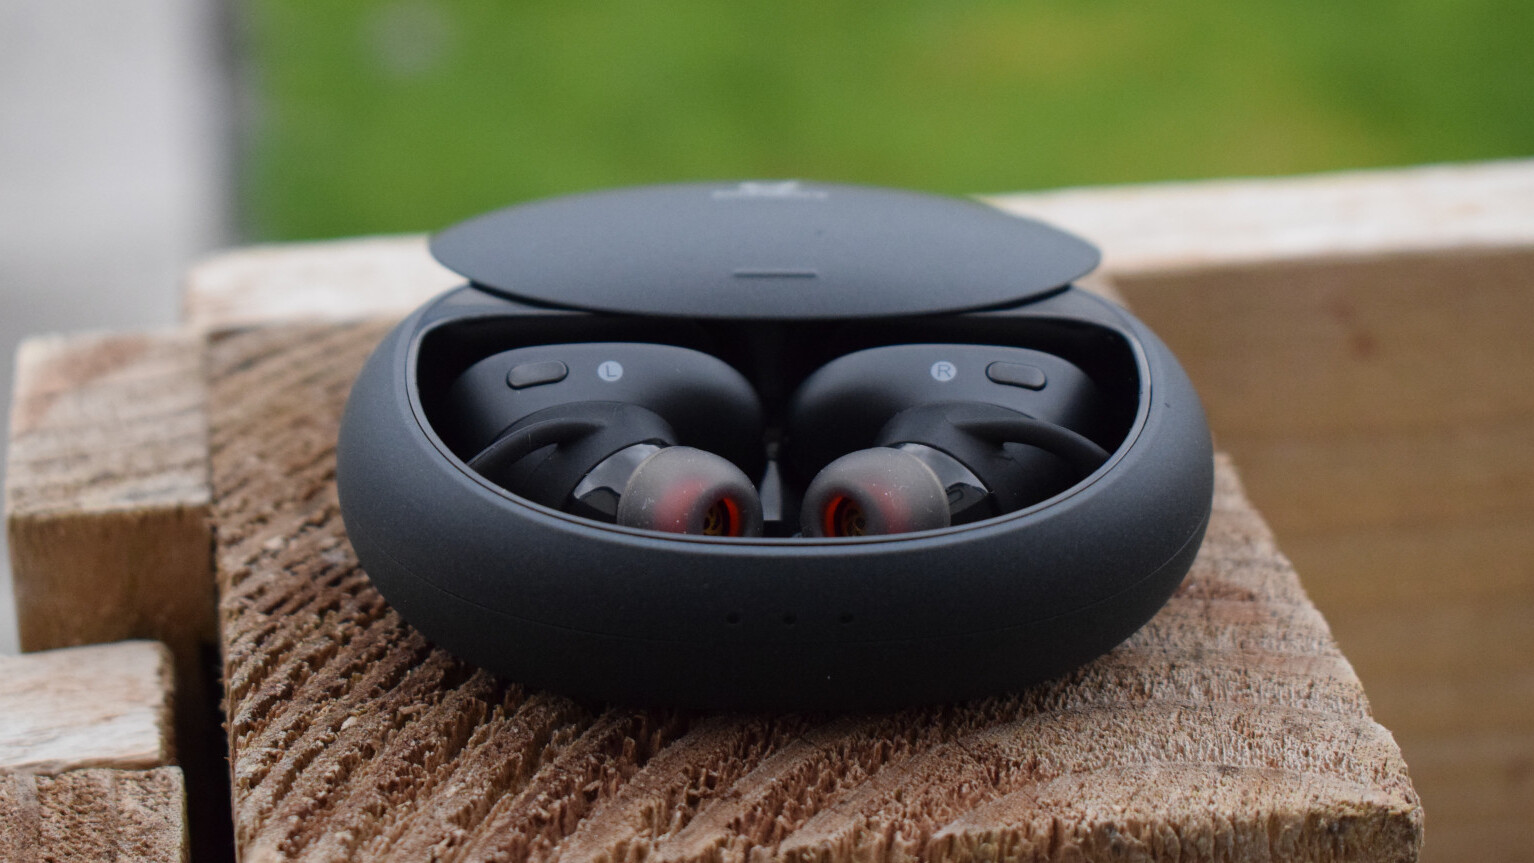 Review: Anker’s Soundcore Liberty 2 Pro are feature-packed, long-lasting wireless earbuds